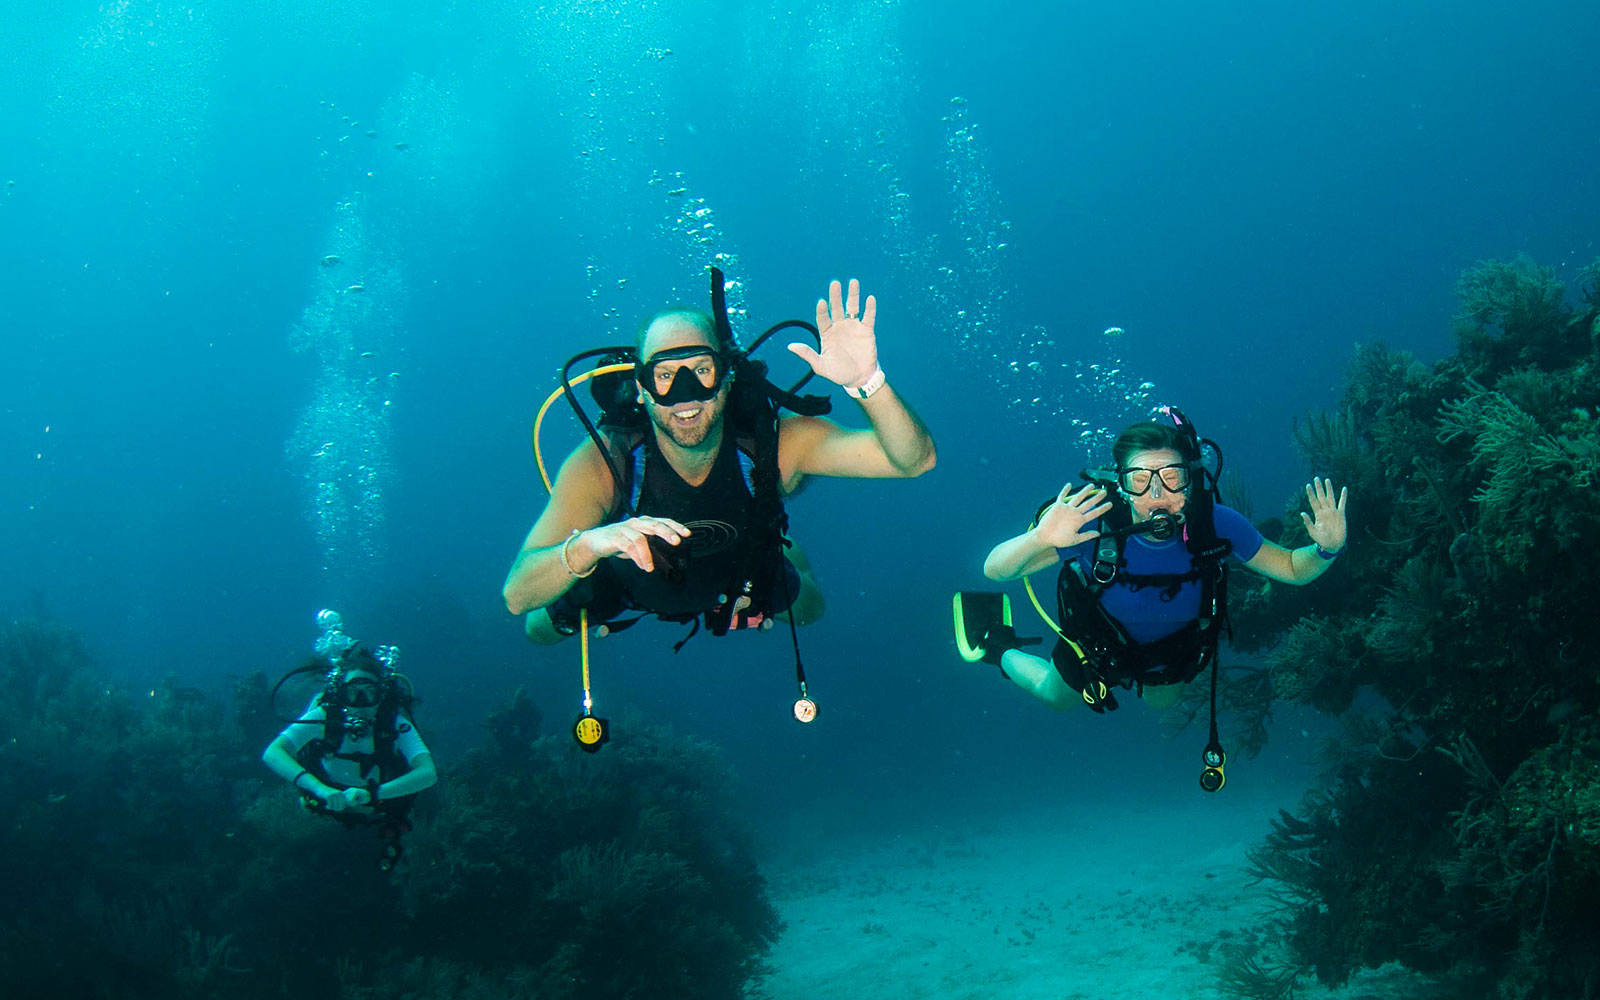 PADI Course Director and AmbassaDiver Thomas Koch and his daughter Claire diving and building underwater connections together